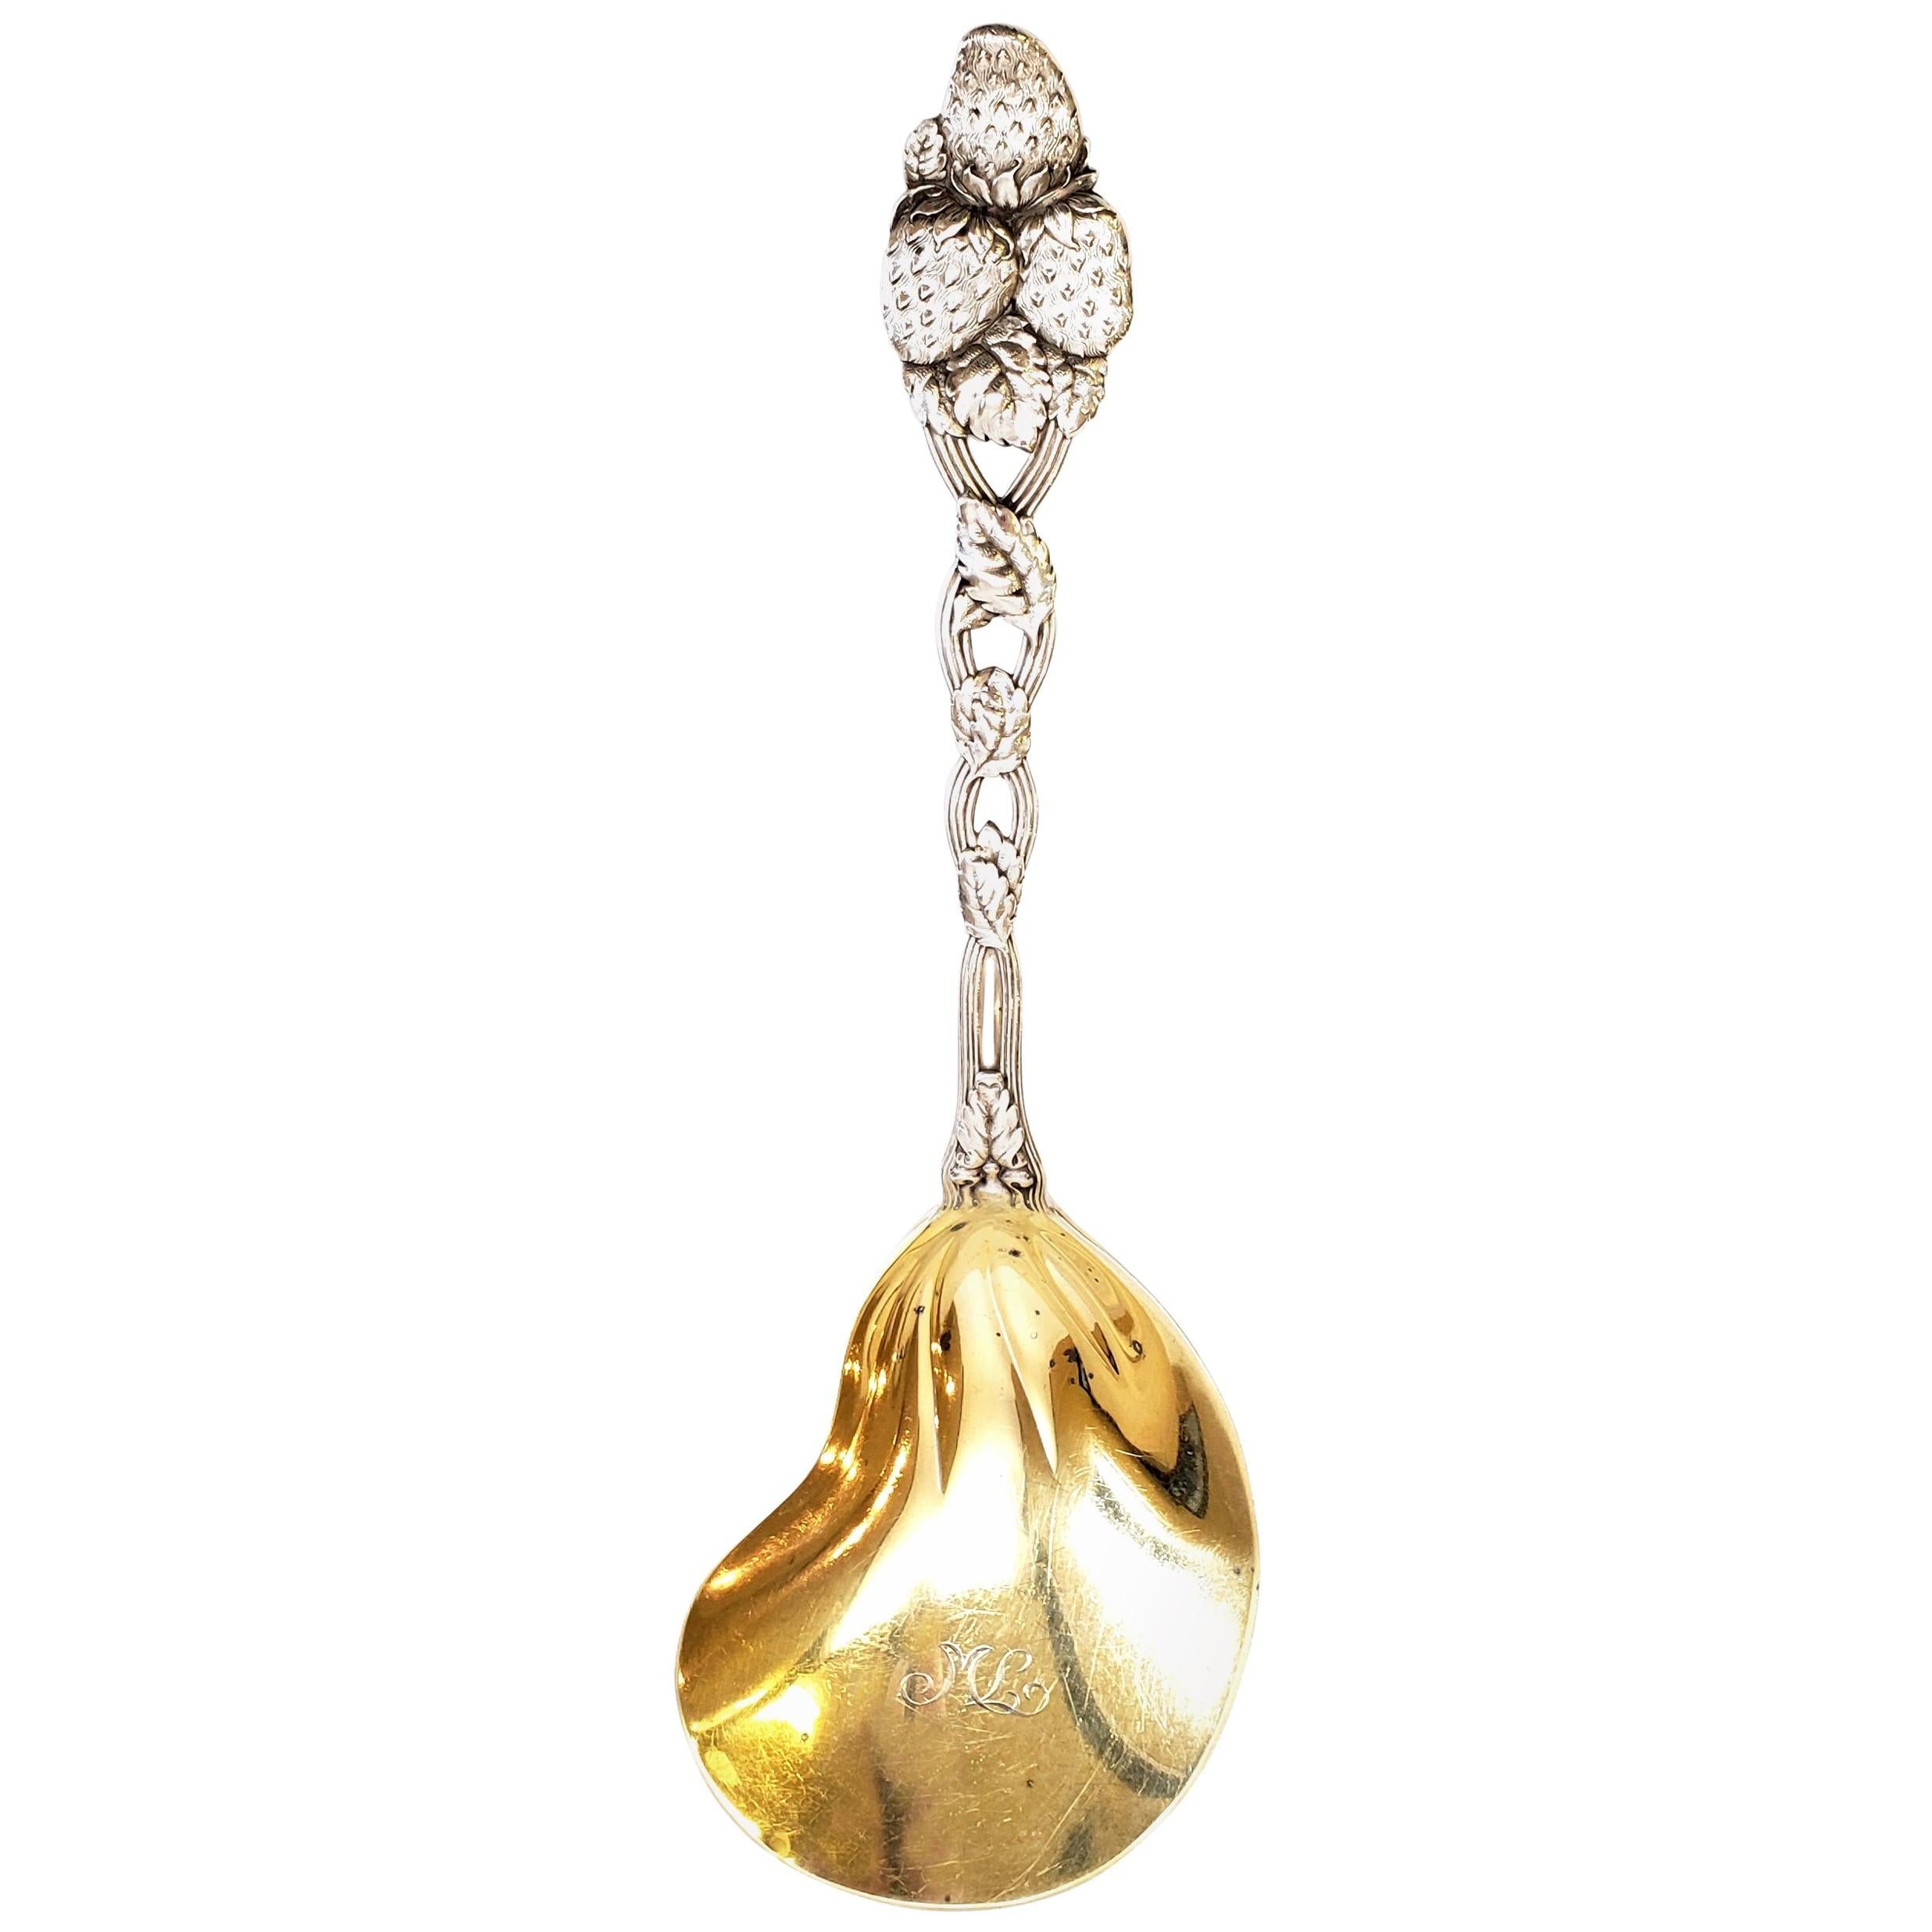 Tiffany & Co. Sterling Silver Strawberry Pattern Berry Spoon For Sale